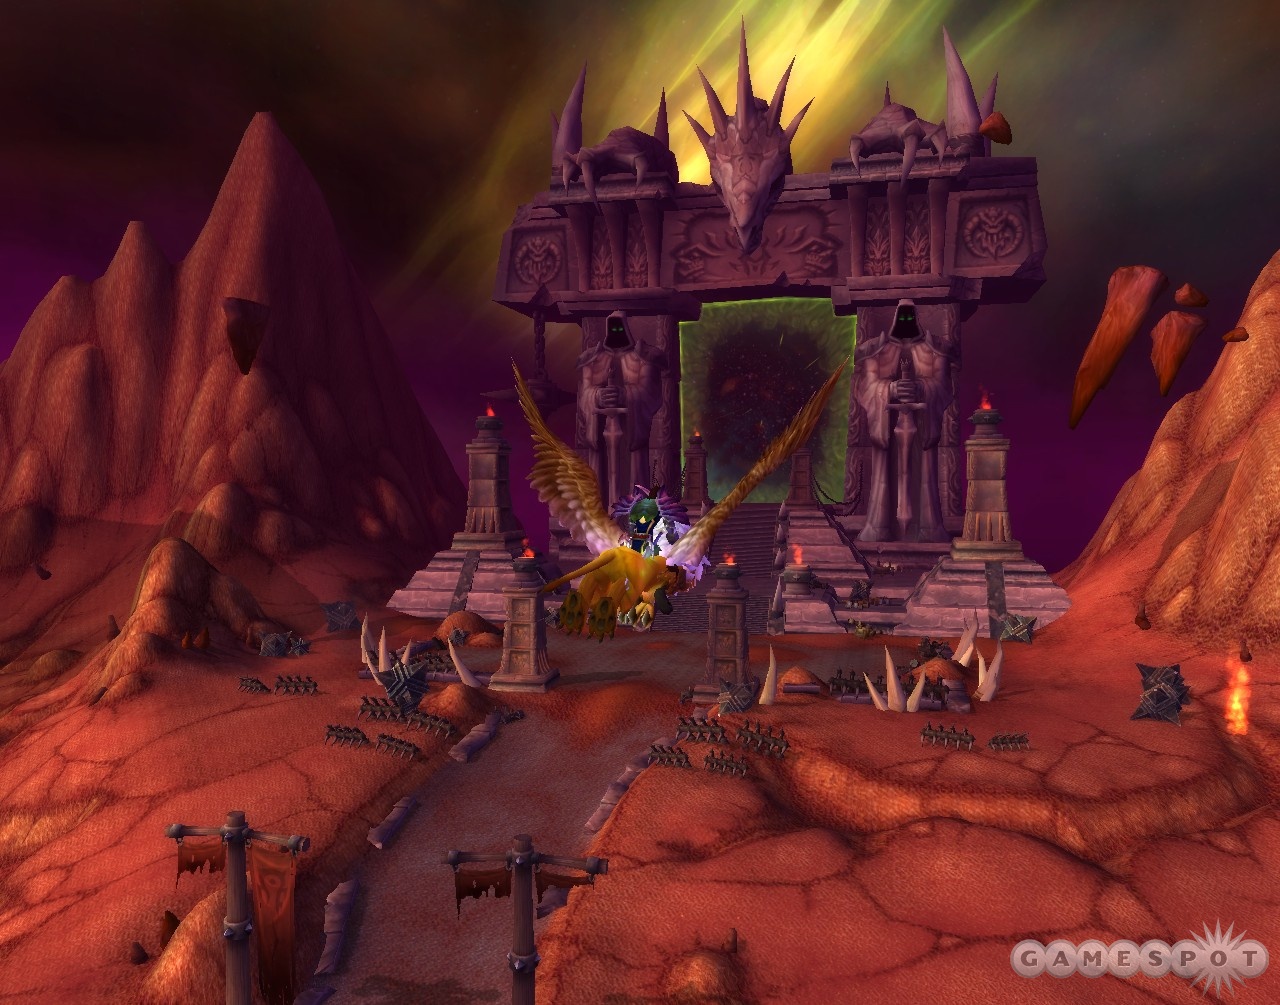 The Dark Portal is much, much bigger on the Outland side than it is when viewed from the Blasted Lands.